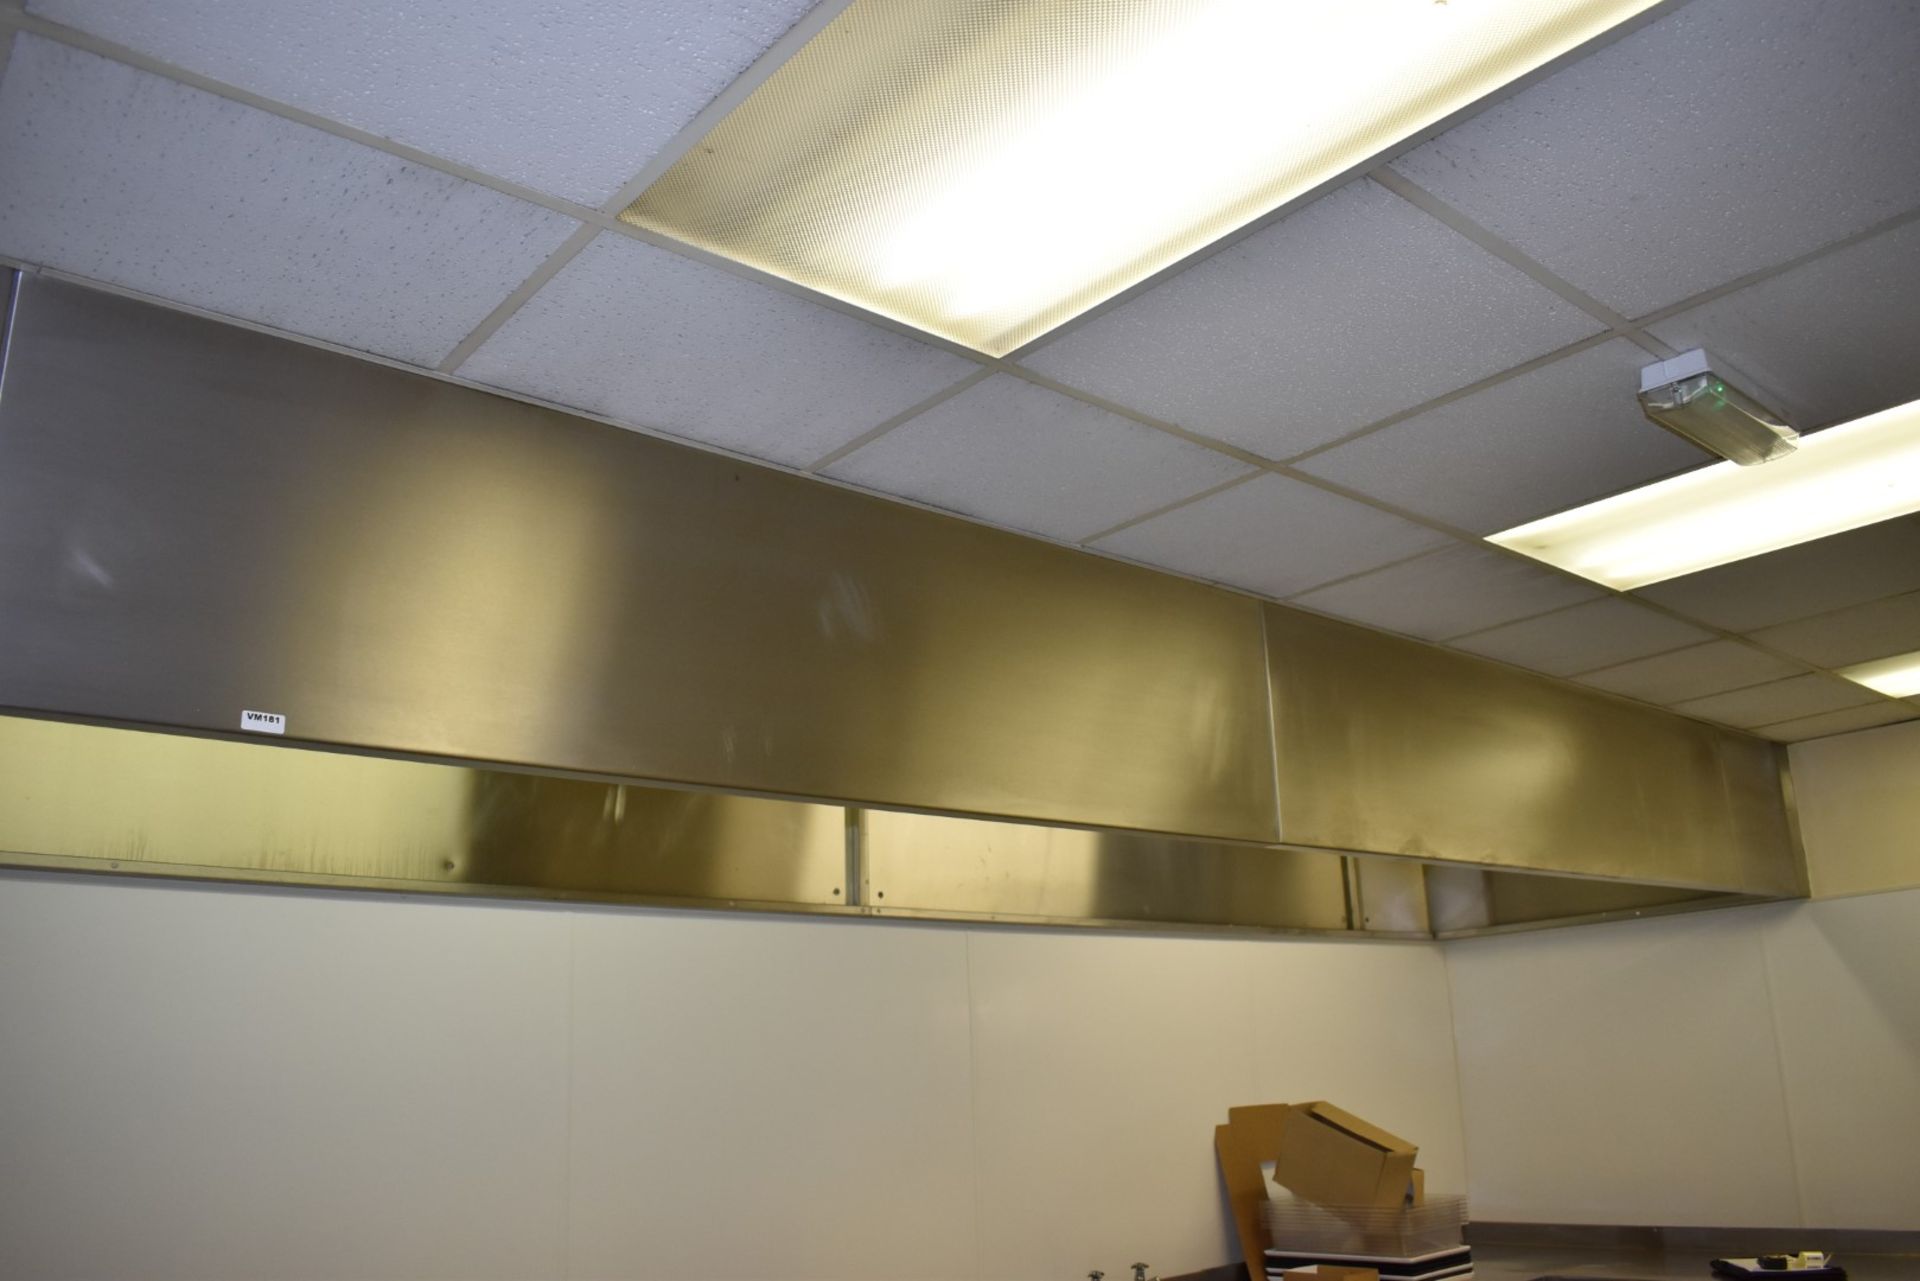 1 x Commerical Kitchen Ceiling Mounted Extractor Hood - Stainless Steel - Breaks into Multiple Parts - Image 3 of 8